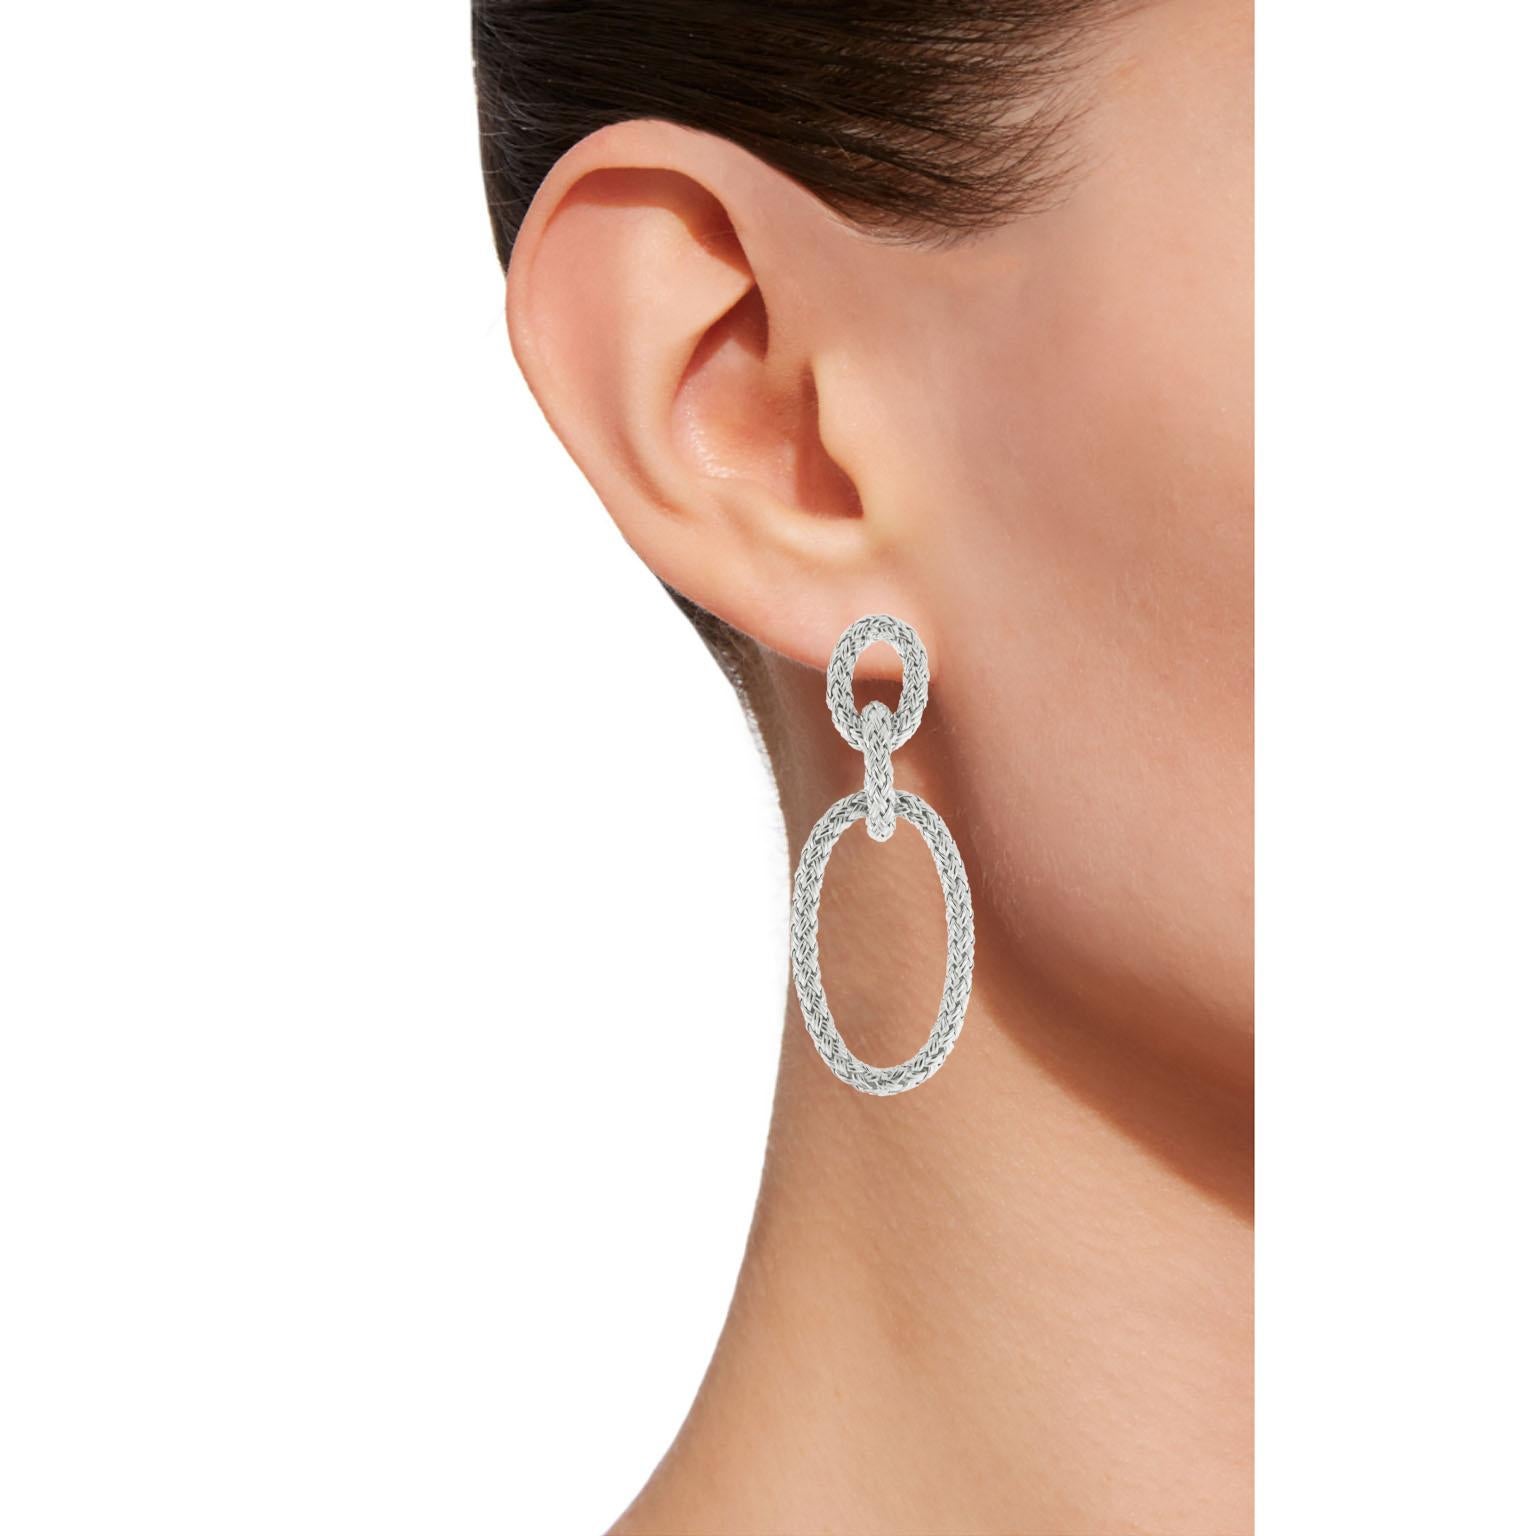 Jona design collection, hand crafted in Italy, sterling silver Basket Weave ear pendants. 
Dimensions: H 2.04 in / 5.20 cm X W 0.78 in / 19.86 mm X D 0.11 in / 2.98 mm
Weight: 8.7 g
All Jona jewelry is new and has never been previously owned or